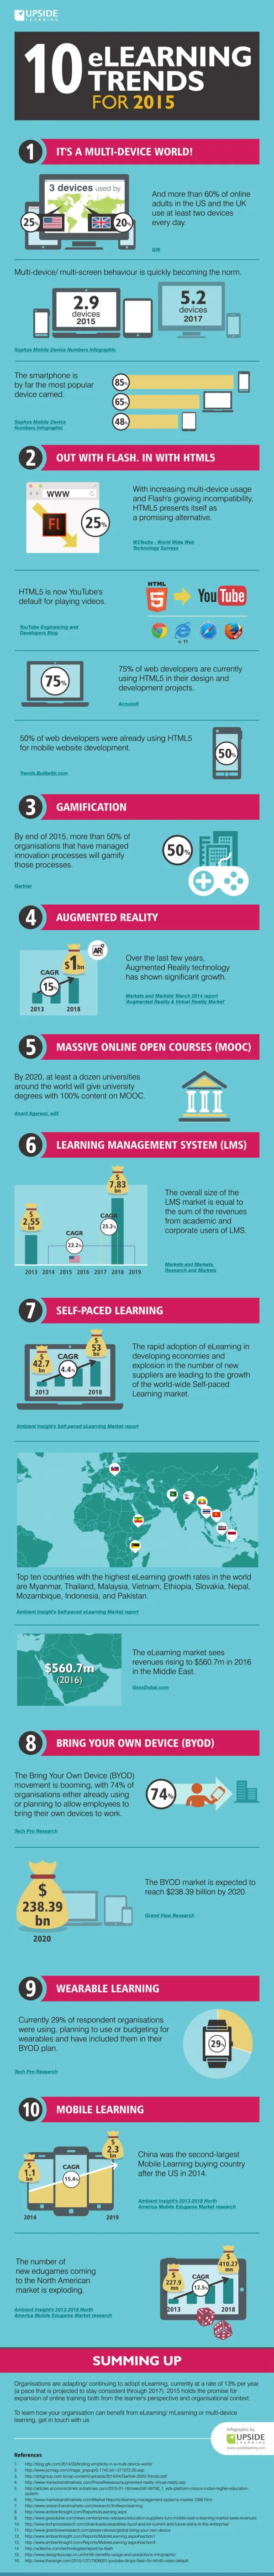 10 eLearning Trends for 2015